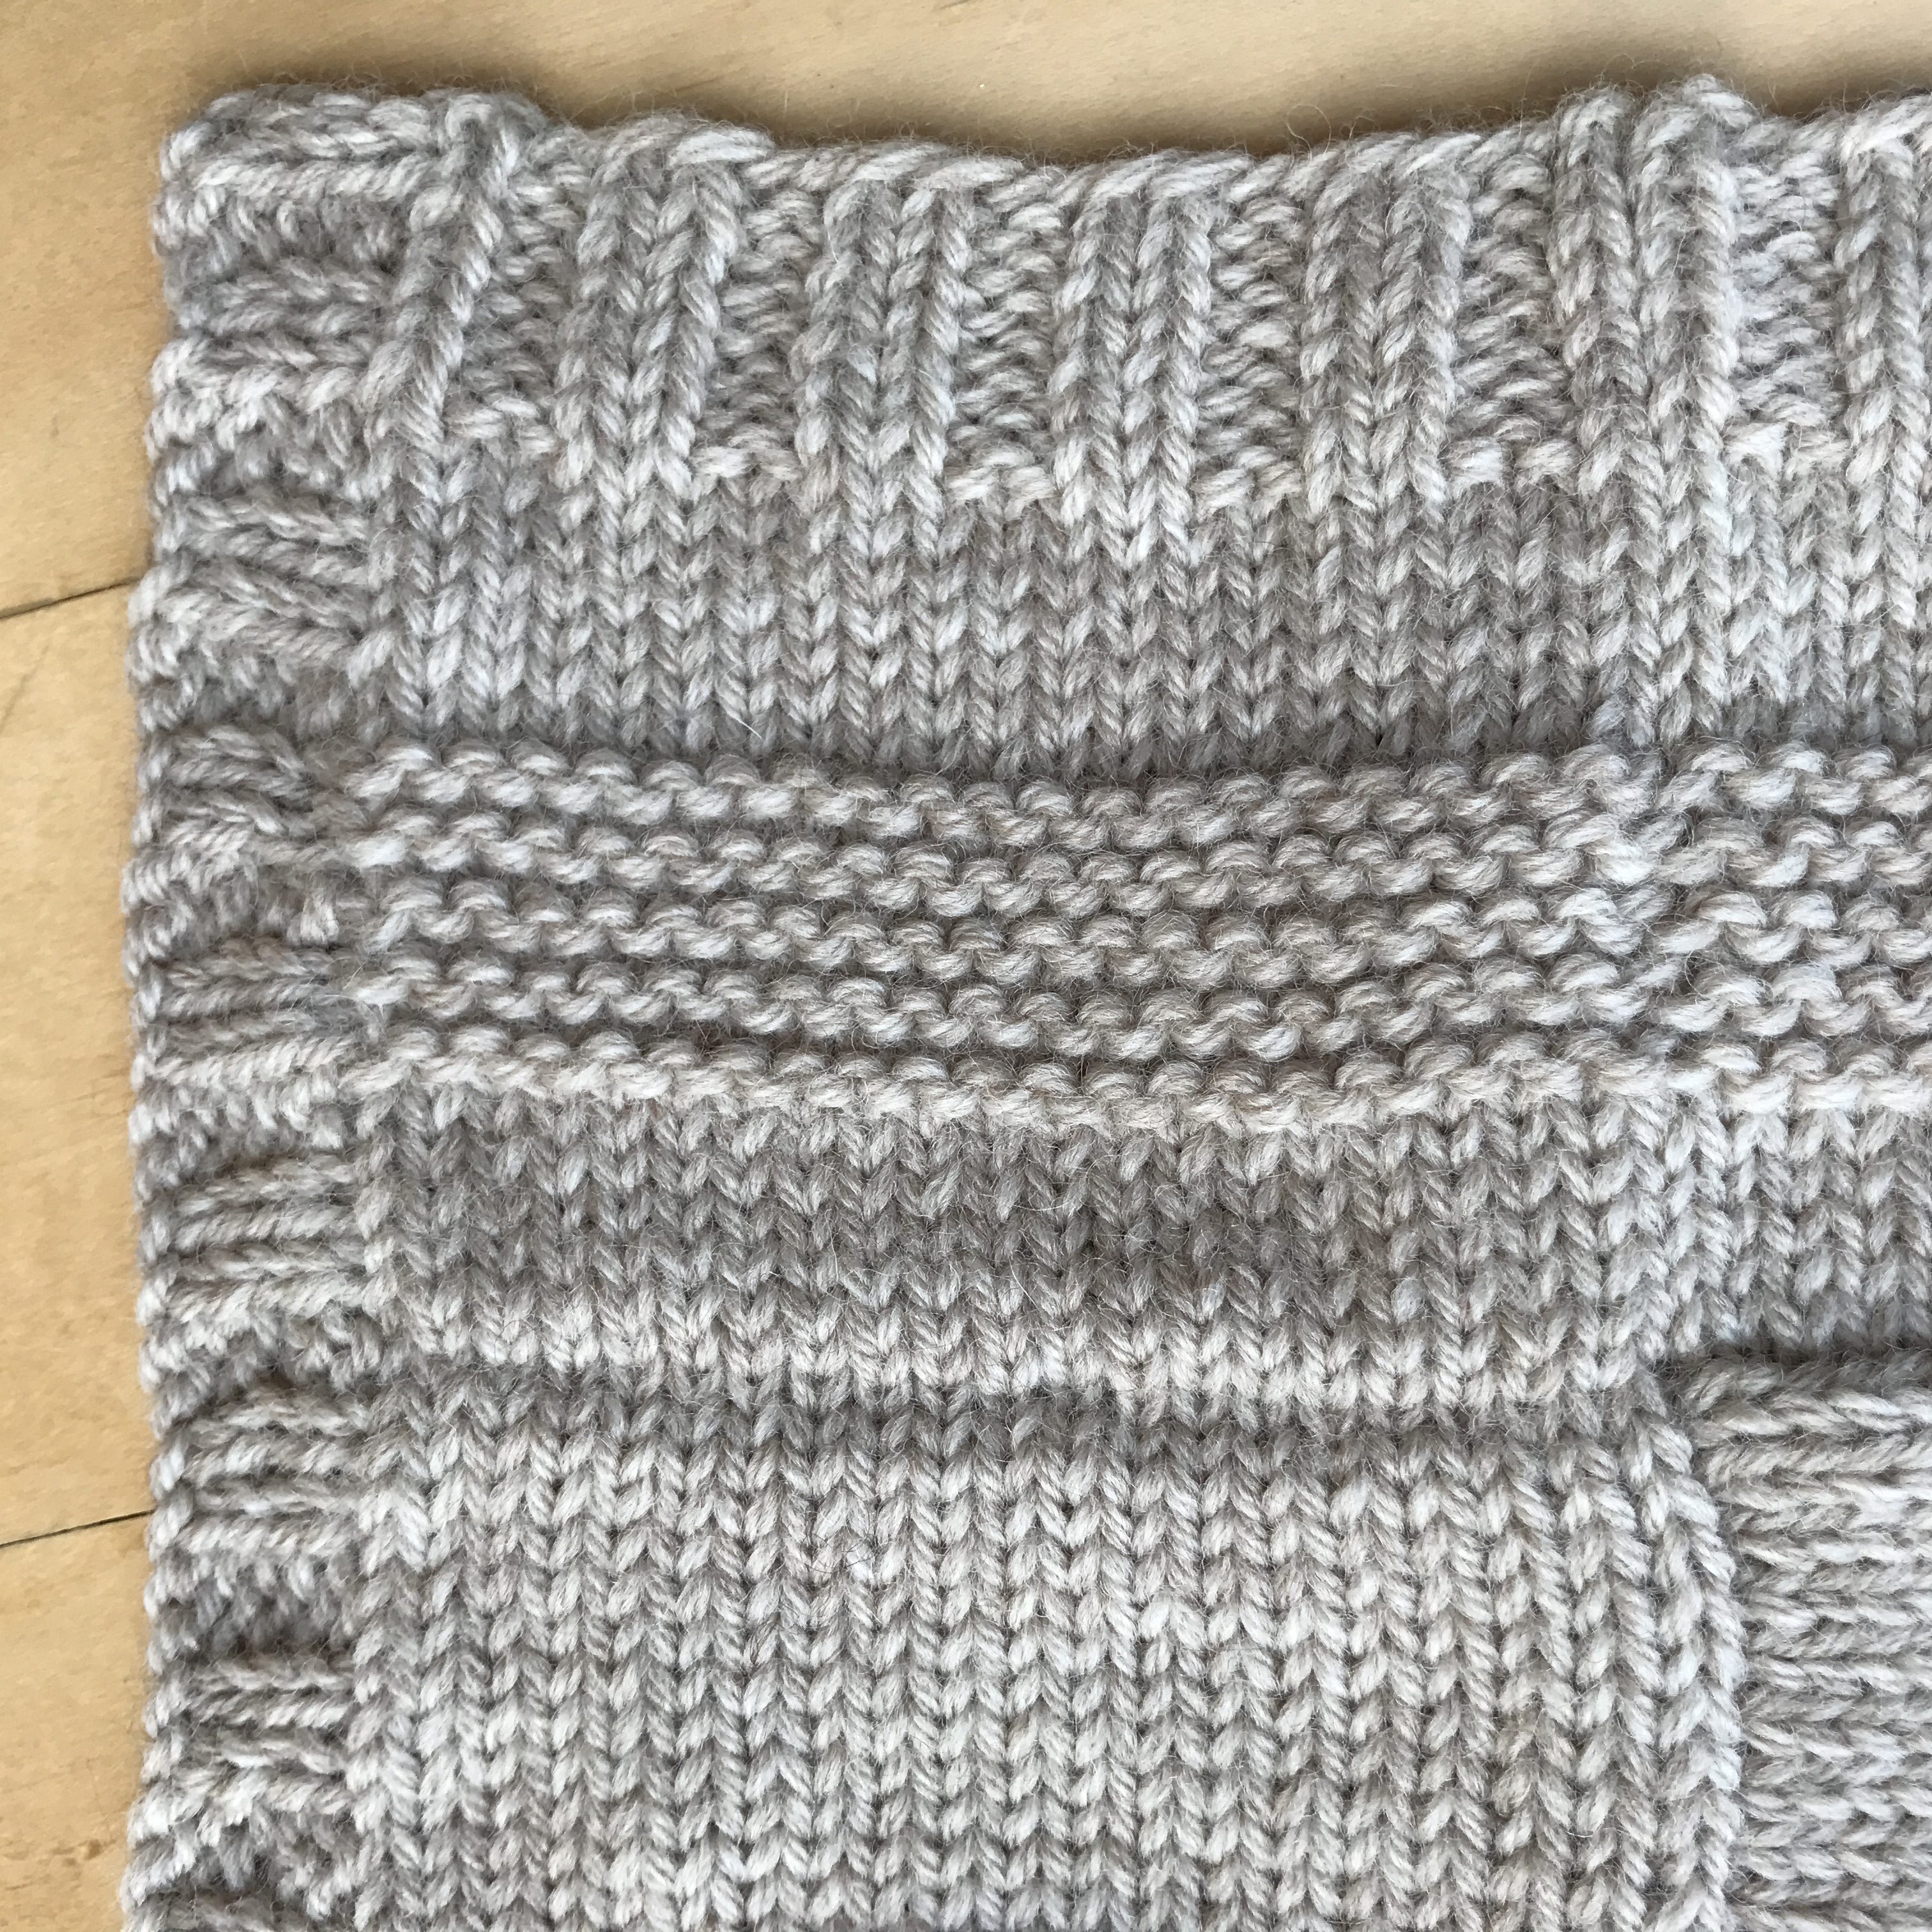 Knitting Class: Knit Along (KAL) Punch Card (10 Sessions